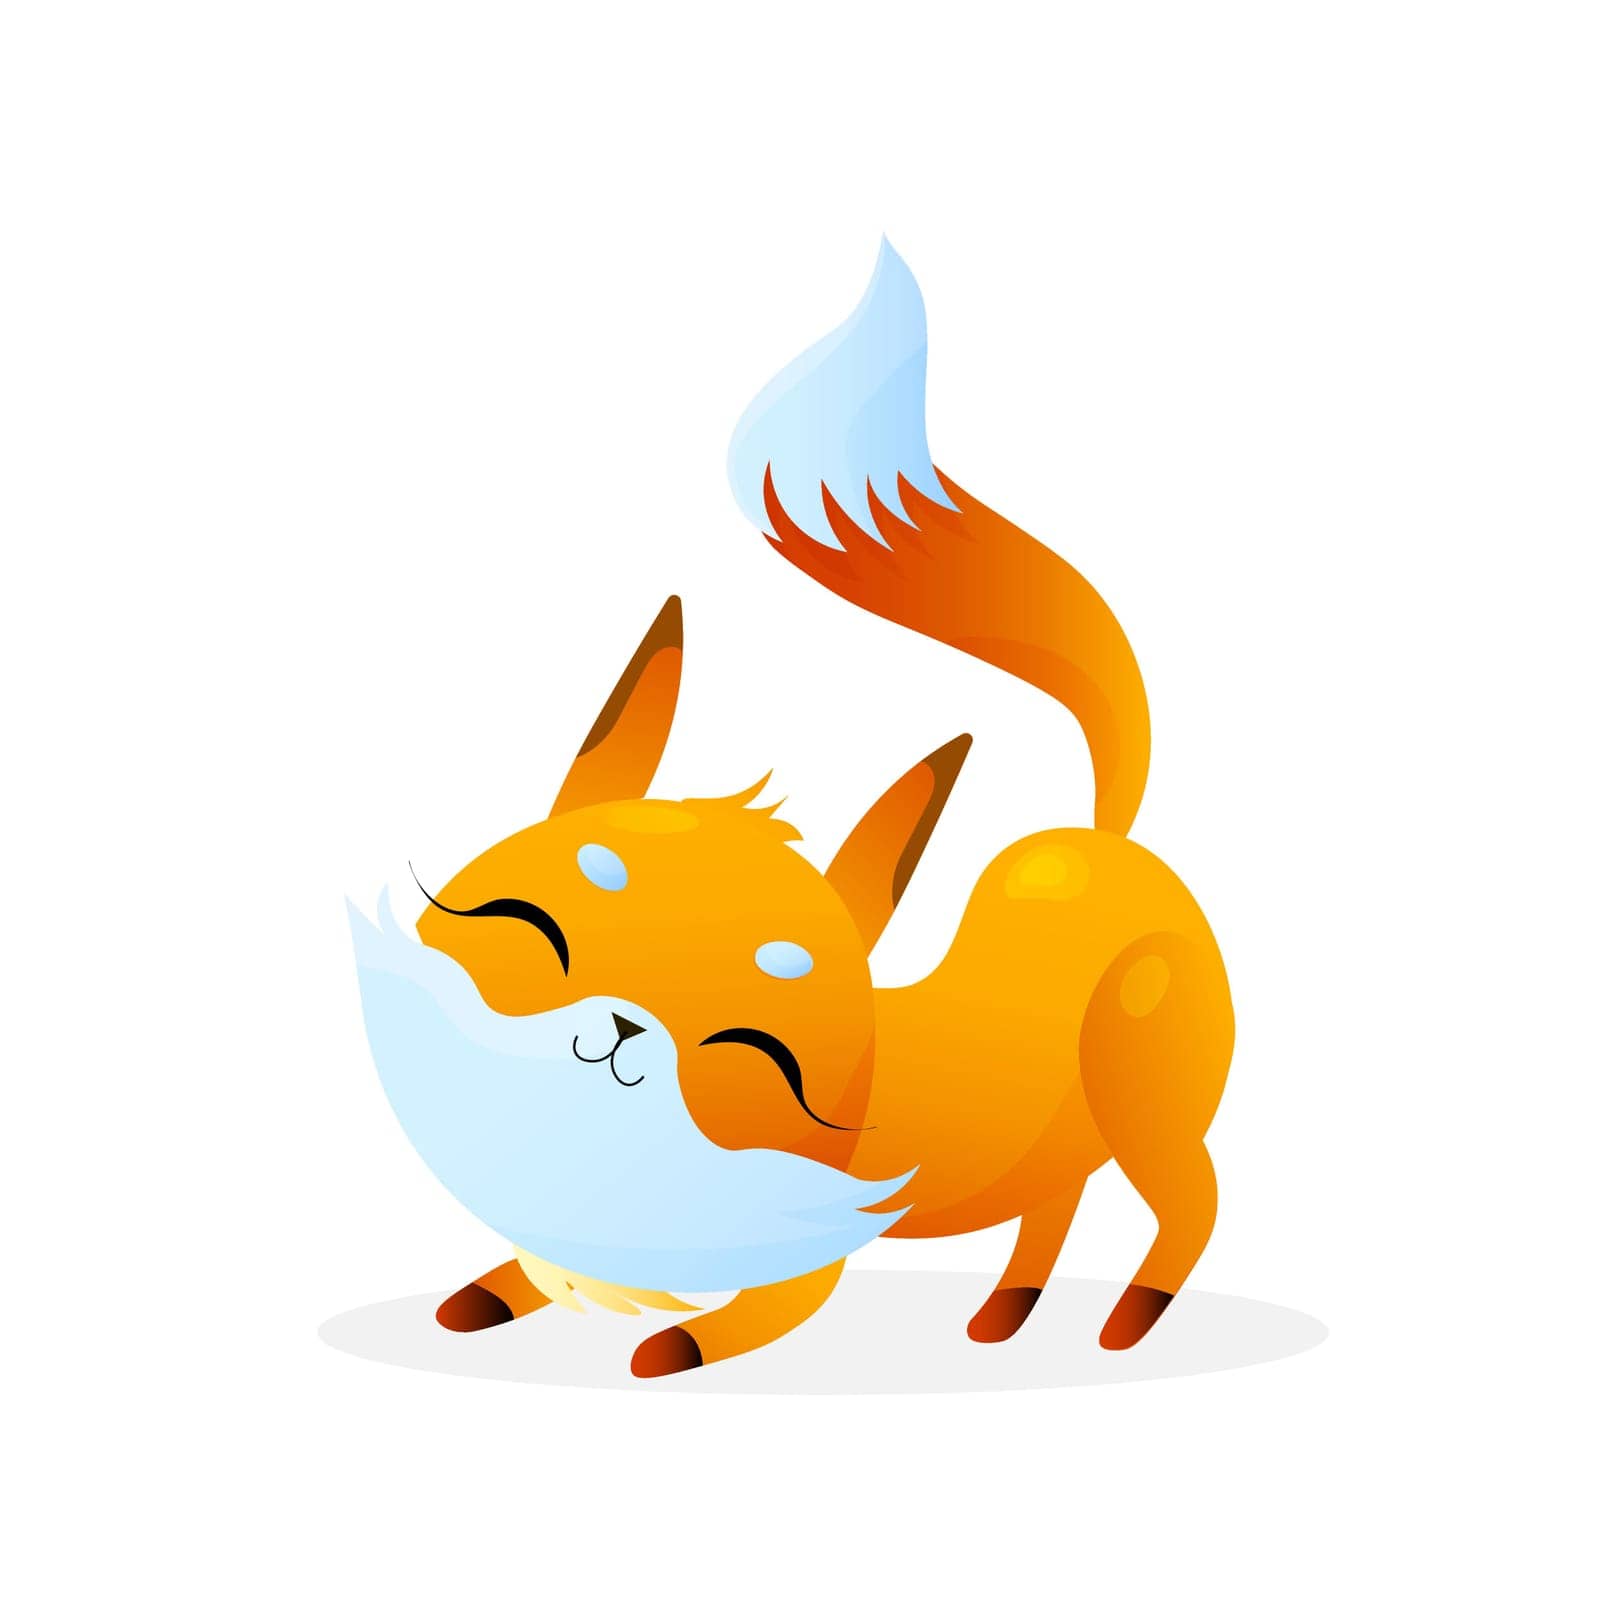 Cute cartoon fox on white background. For nature concepts, children s books illustrating, printing materials Vector illustration with simple gradients. EPS by Alxyzt